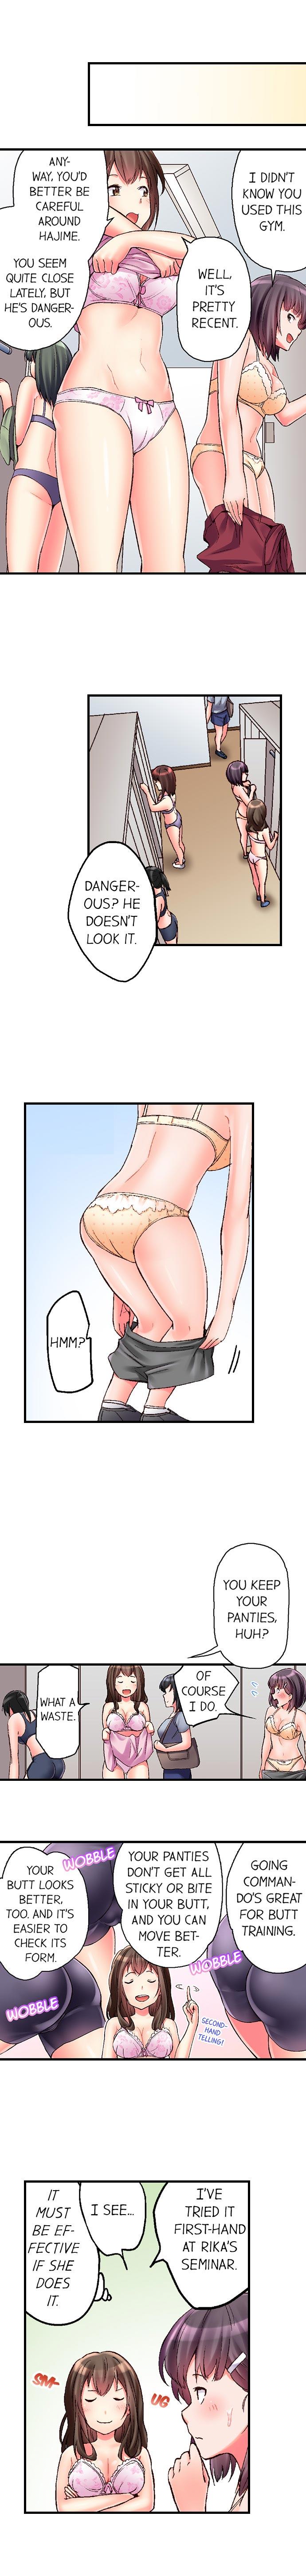 No Panty Booty Workout! Ch. 1 - 12 85